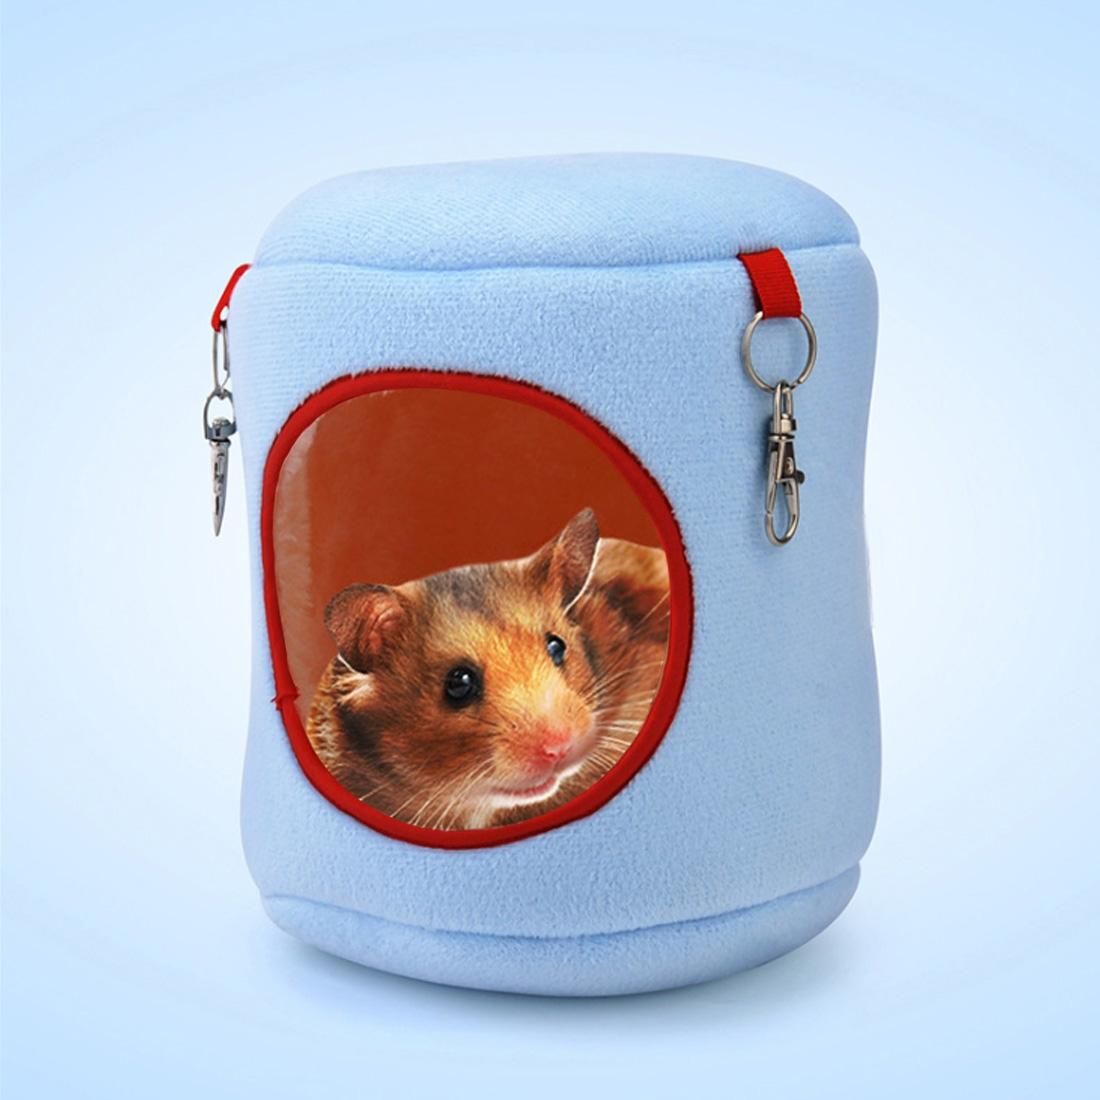 Flannel Cylinder Pet House Warm Hamster Hammock Hanging Bed Small Pets Nest, L, Size:16*16*16cm (Blue)